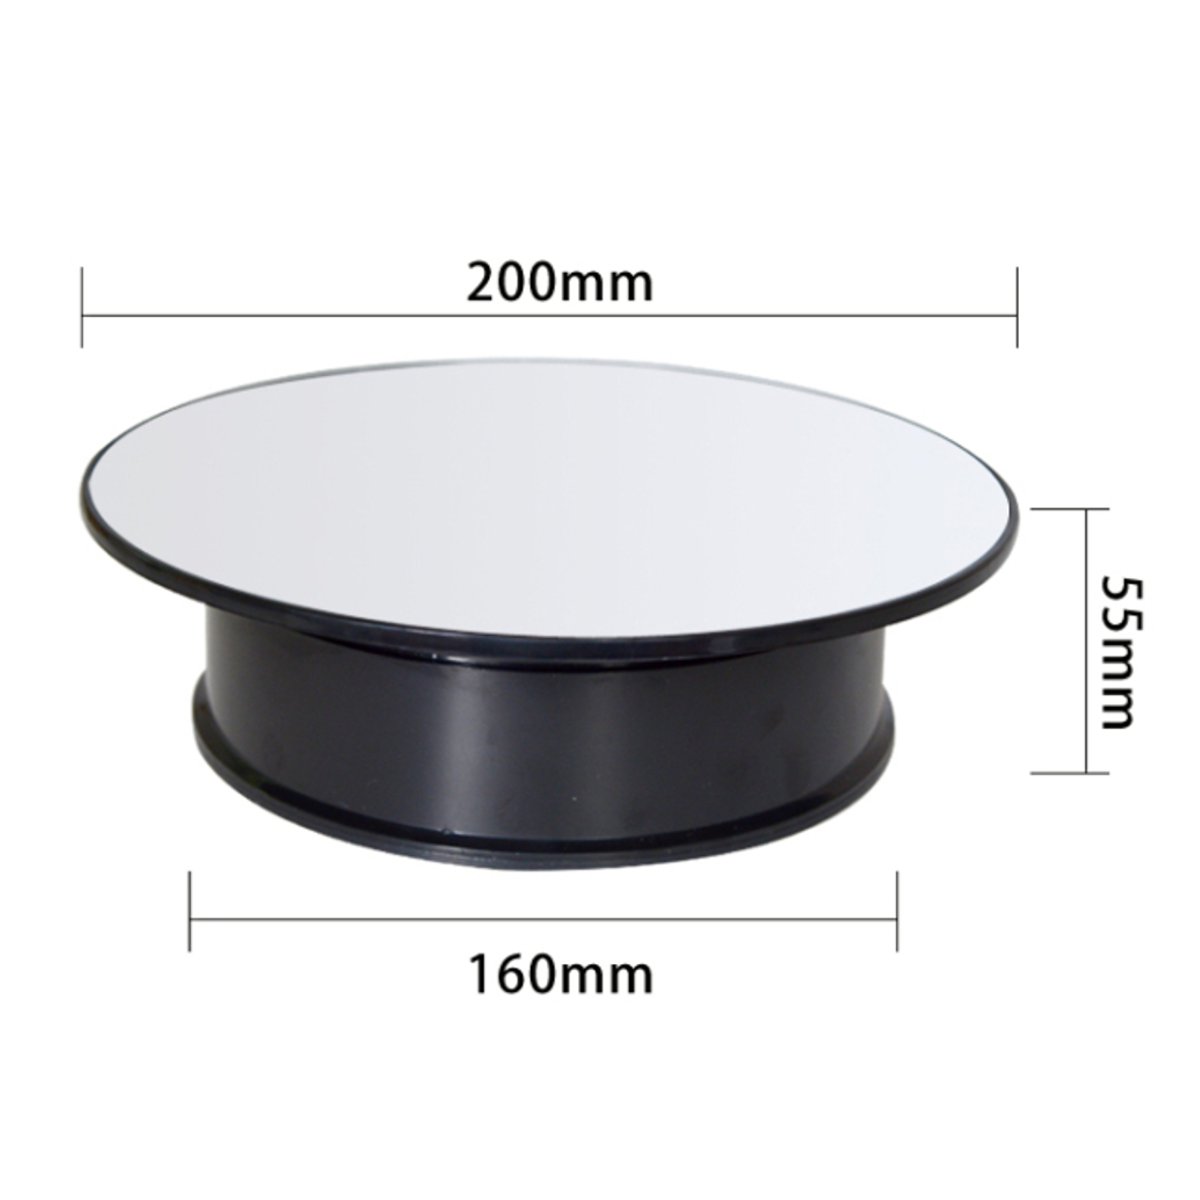 Round-Mirror-Top-Electric-Motorized-360deg-Turntable-Rotary-Jewelry-Display-Stand-Showcase-1373165-7